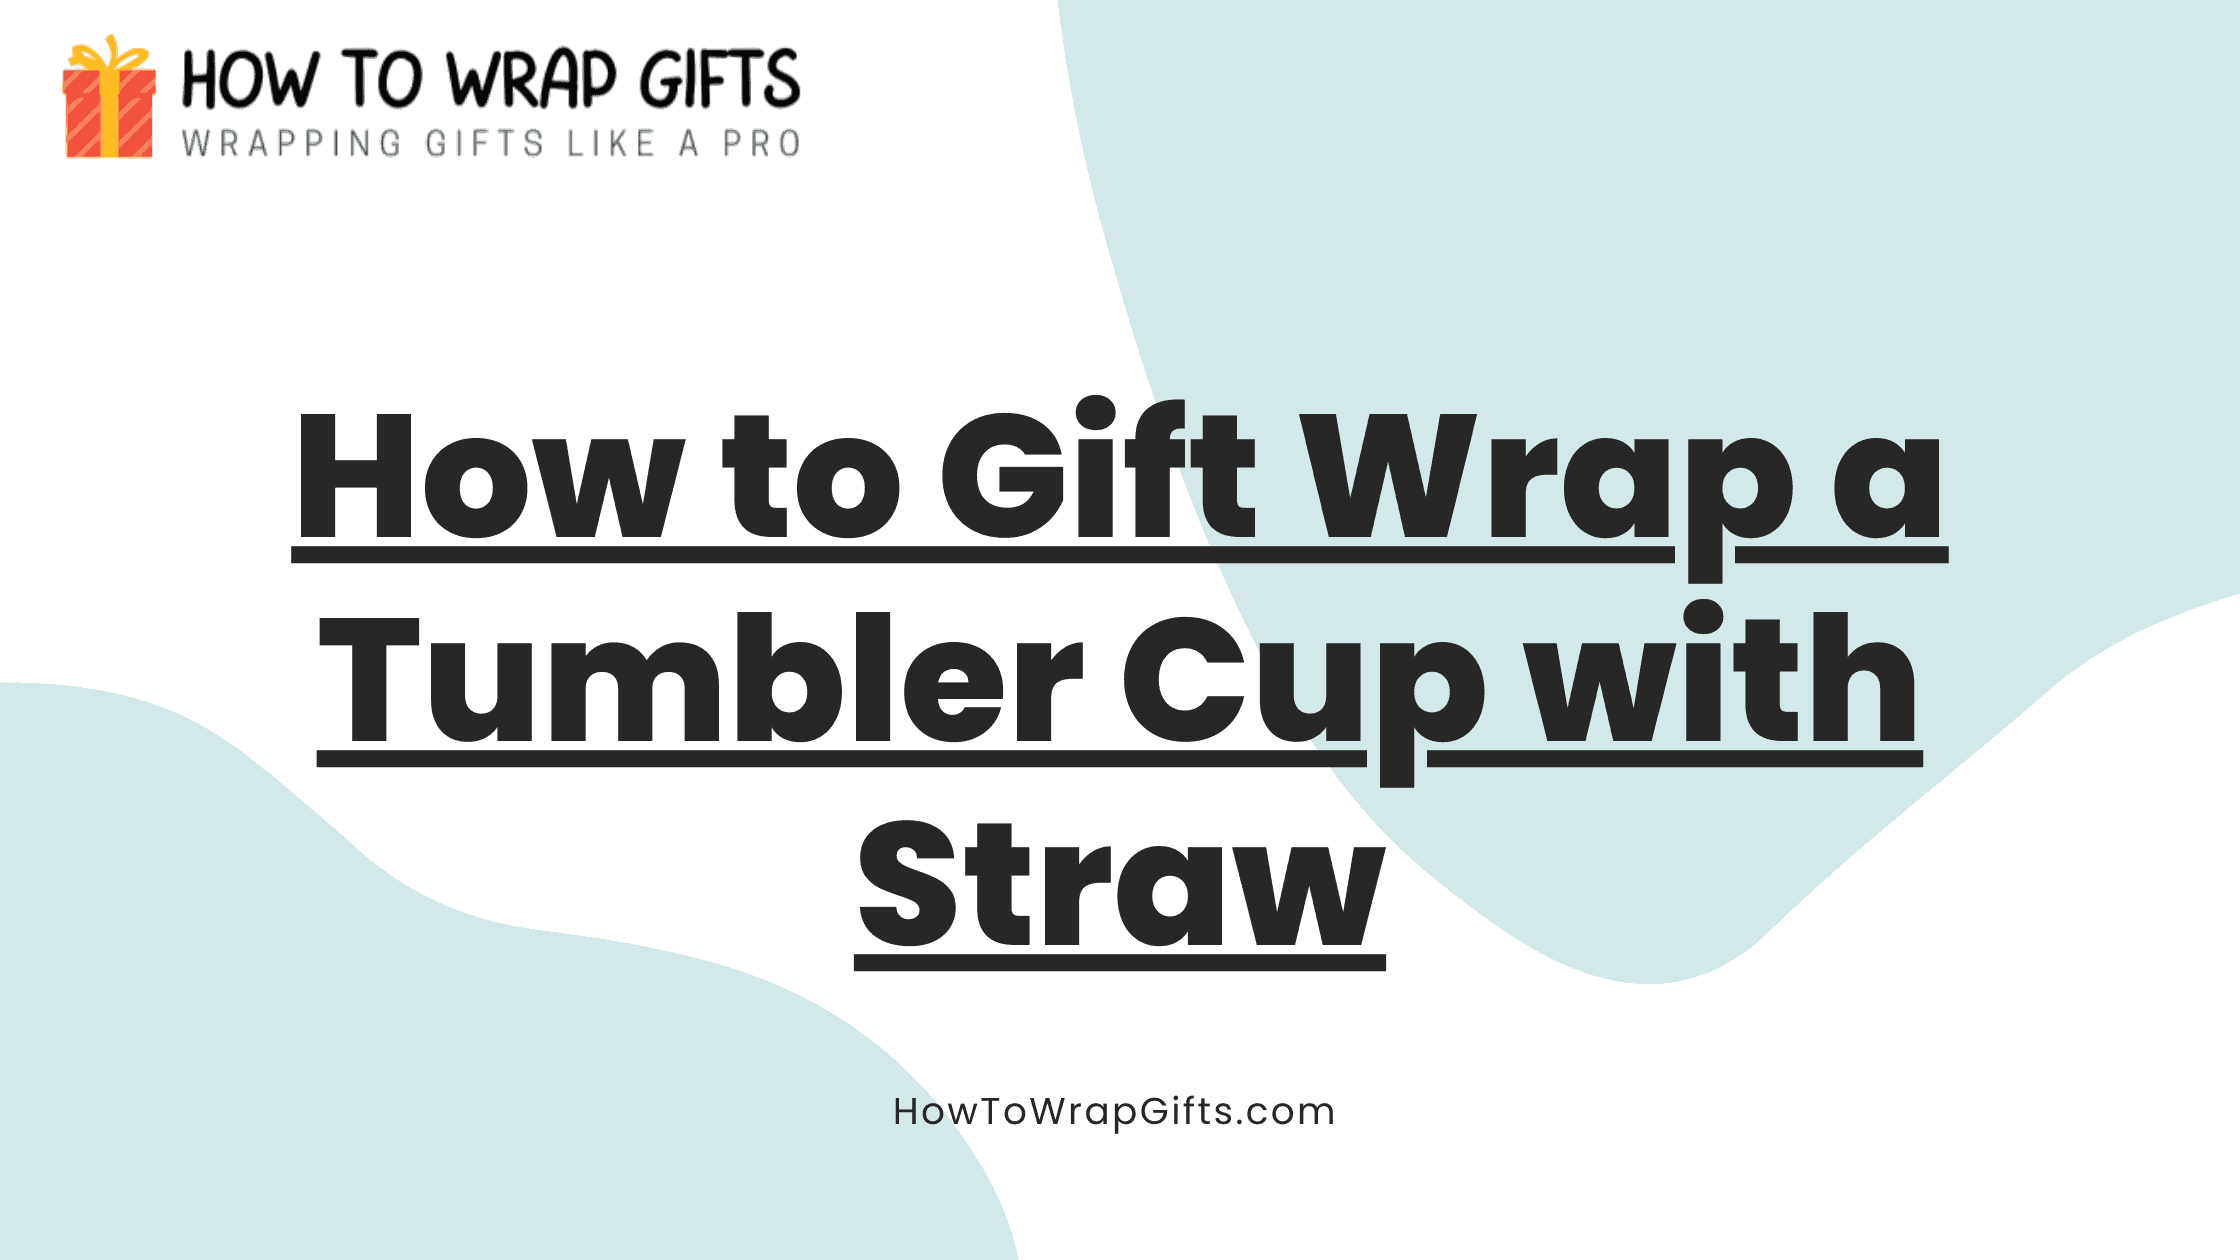 How to Gift Wrap a Tumbler Cup with Straw